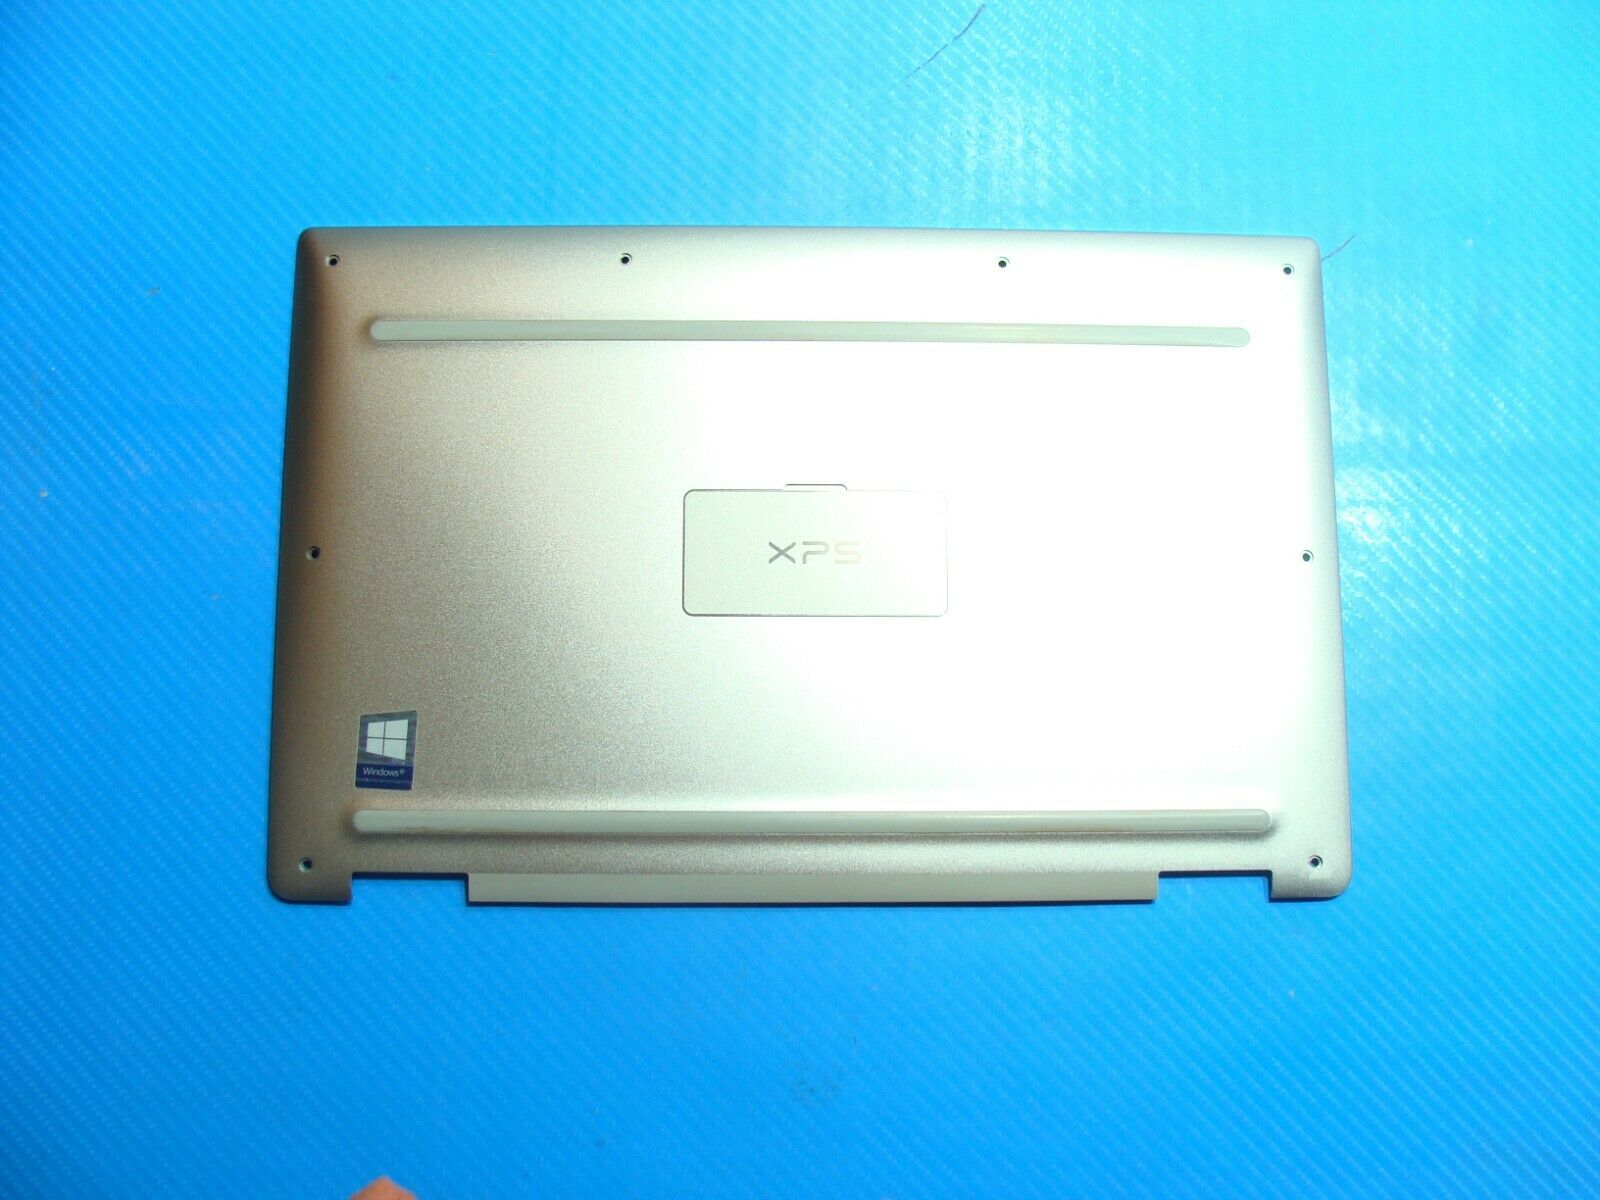 Dell XPS 13.3